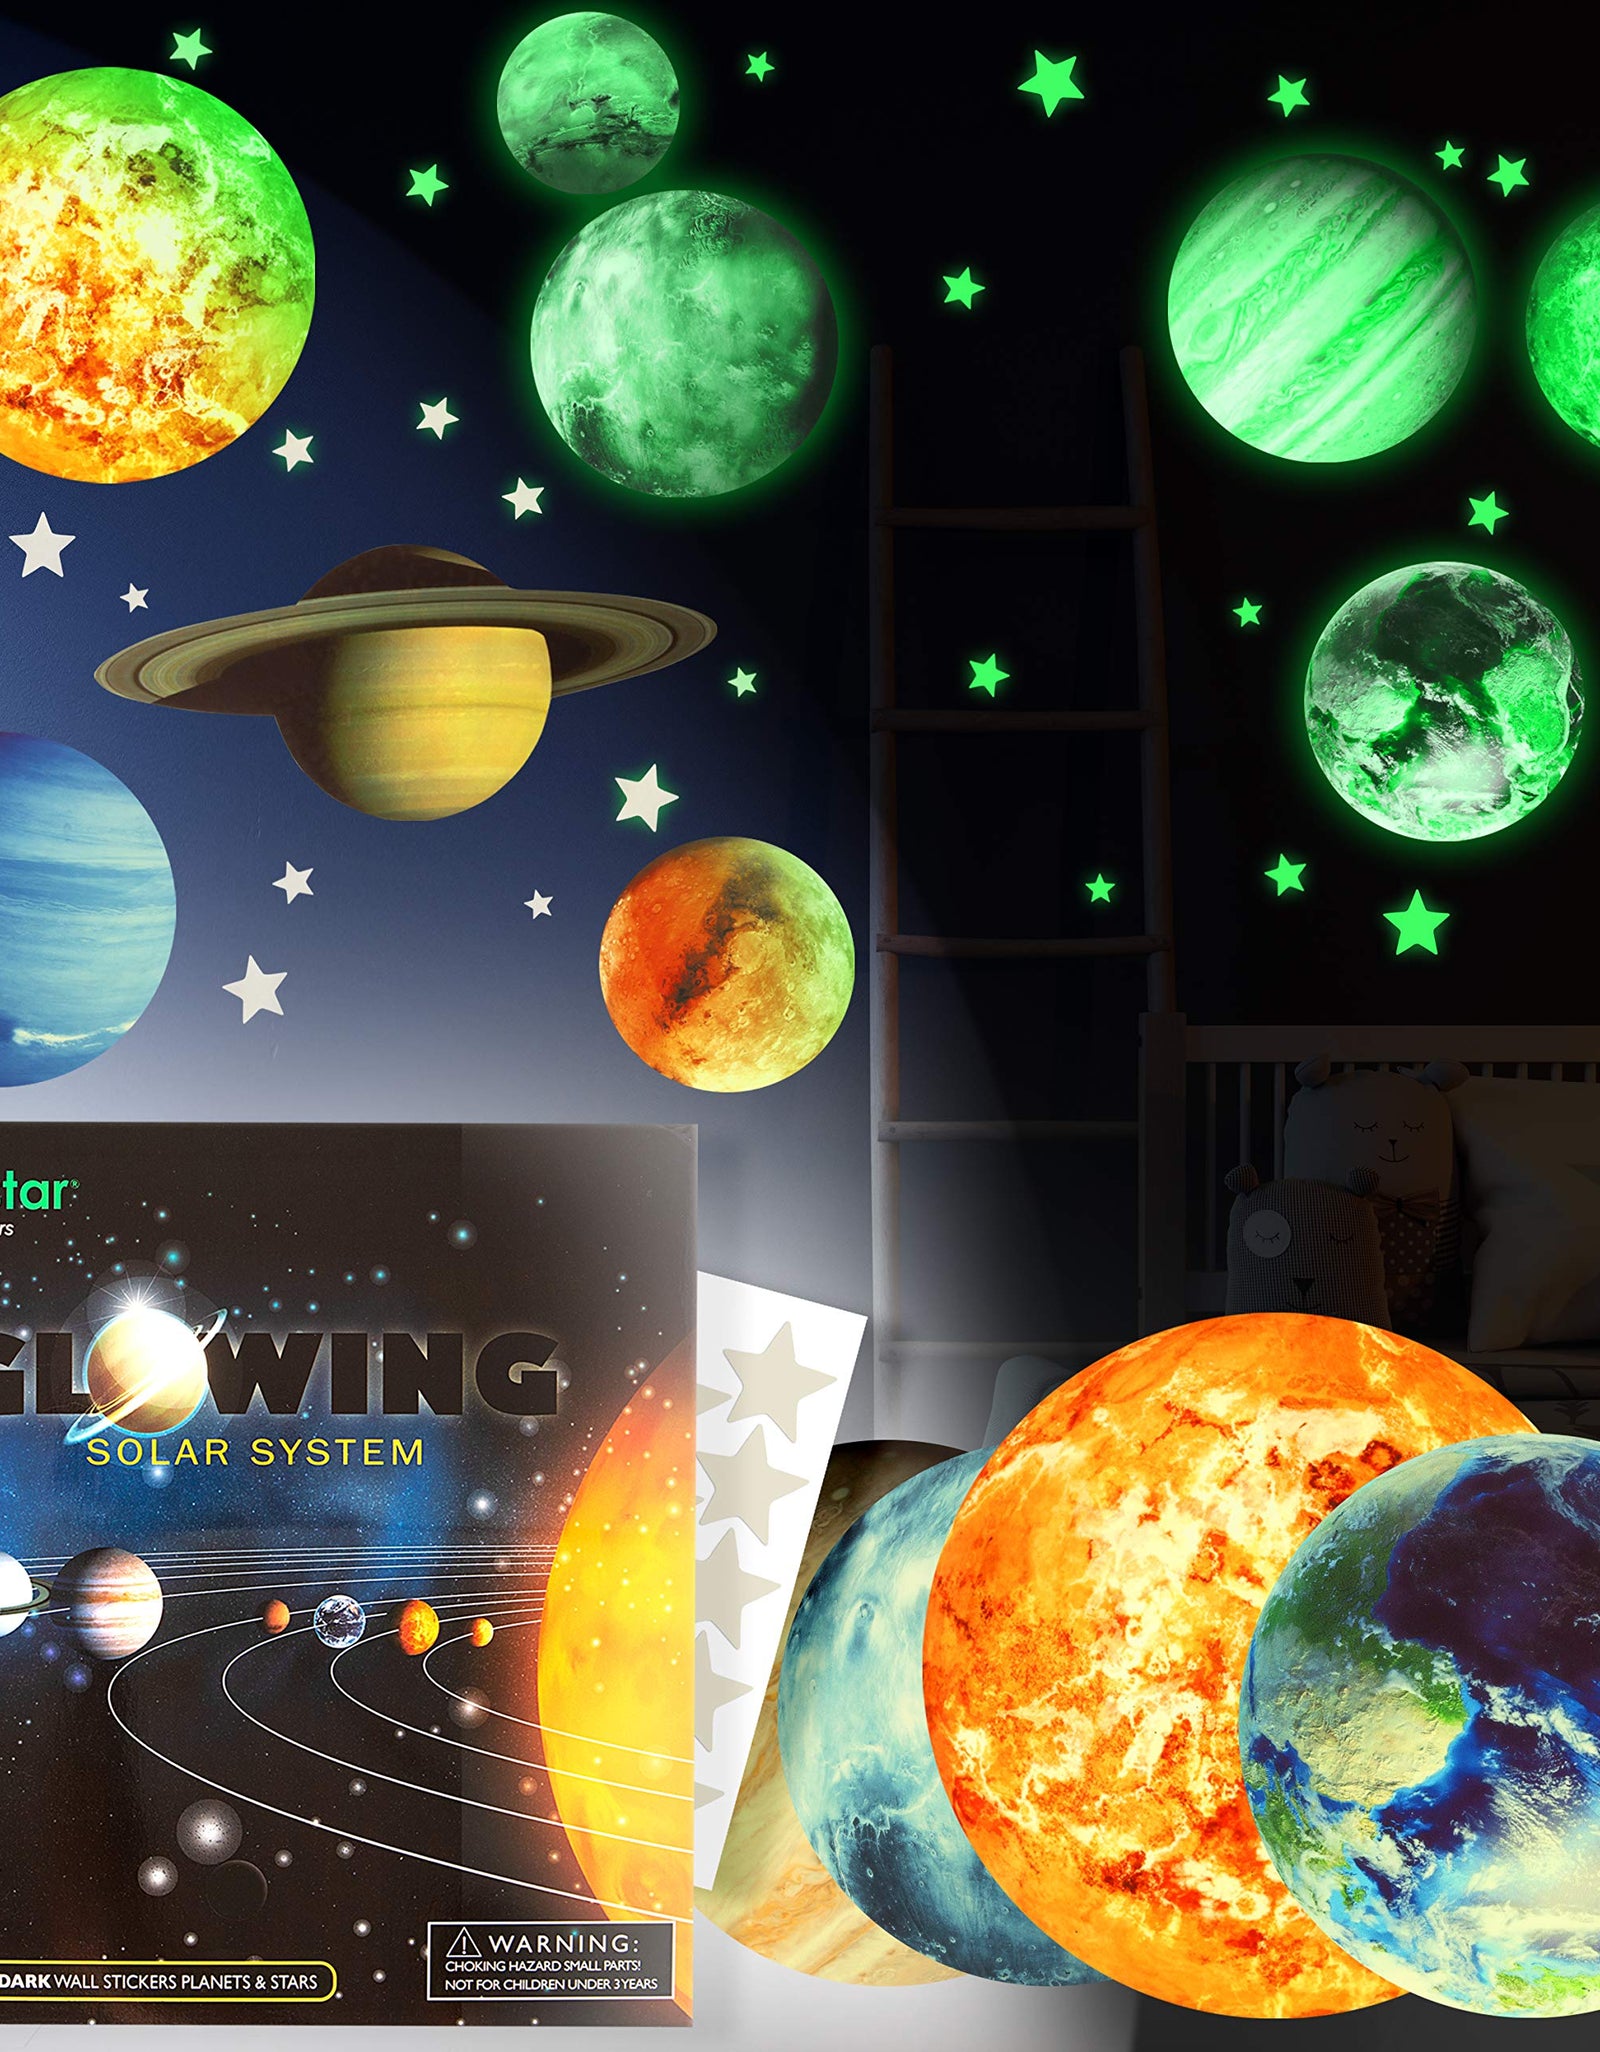 Glow in The Dark Stars and Planets, Bright Solar System Wall Stickers -Glowing Ceiling Decals for Kids Bedroom Any Room,Shining Space Decoration, Birthday Christmas Gift for Boys and Girls